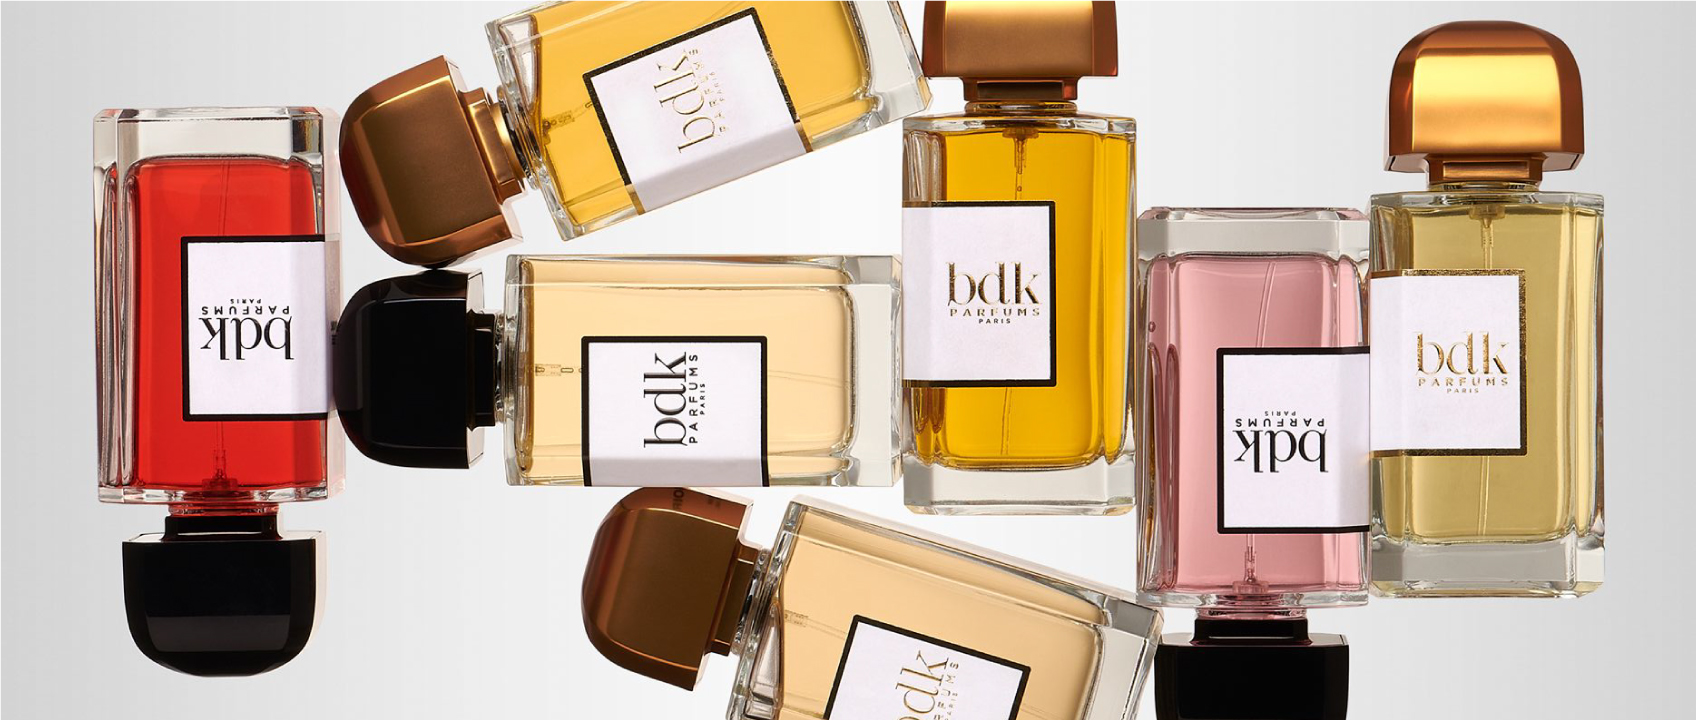 photo of different bottles of fragrances from the bdk parfums range